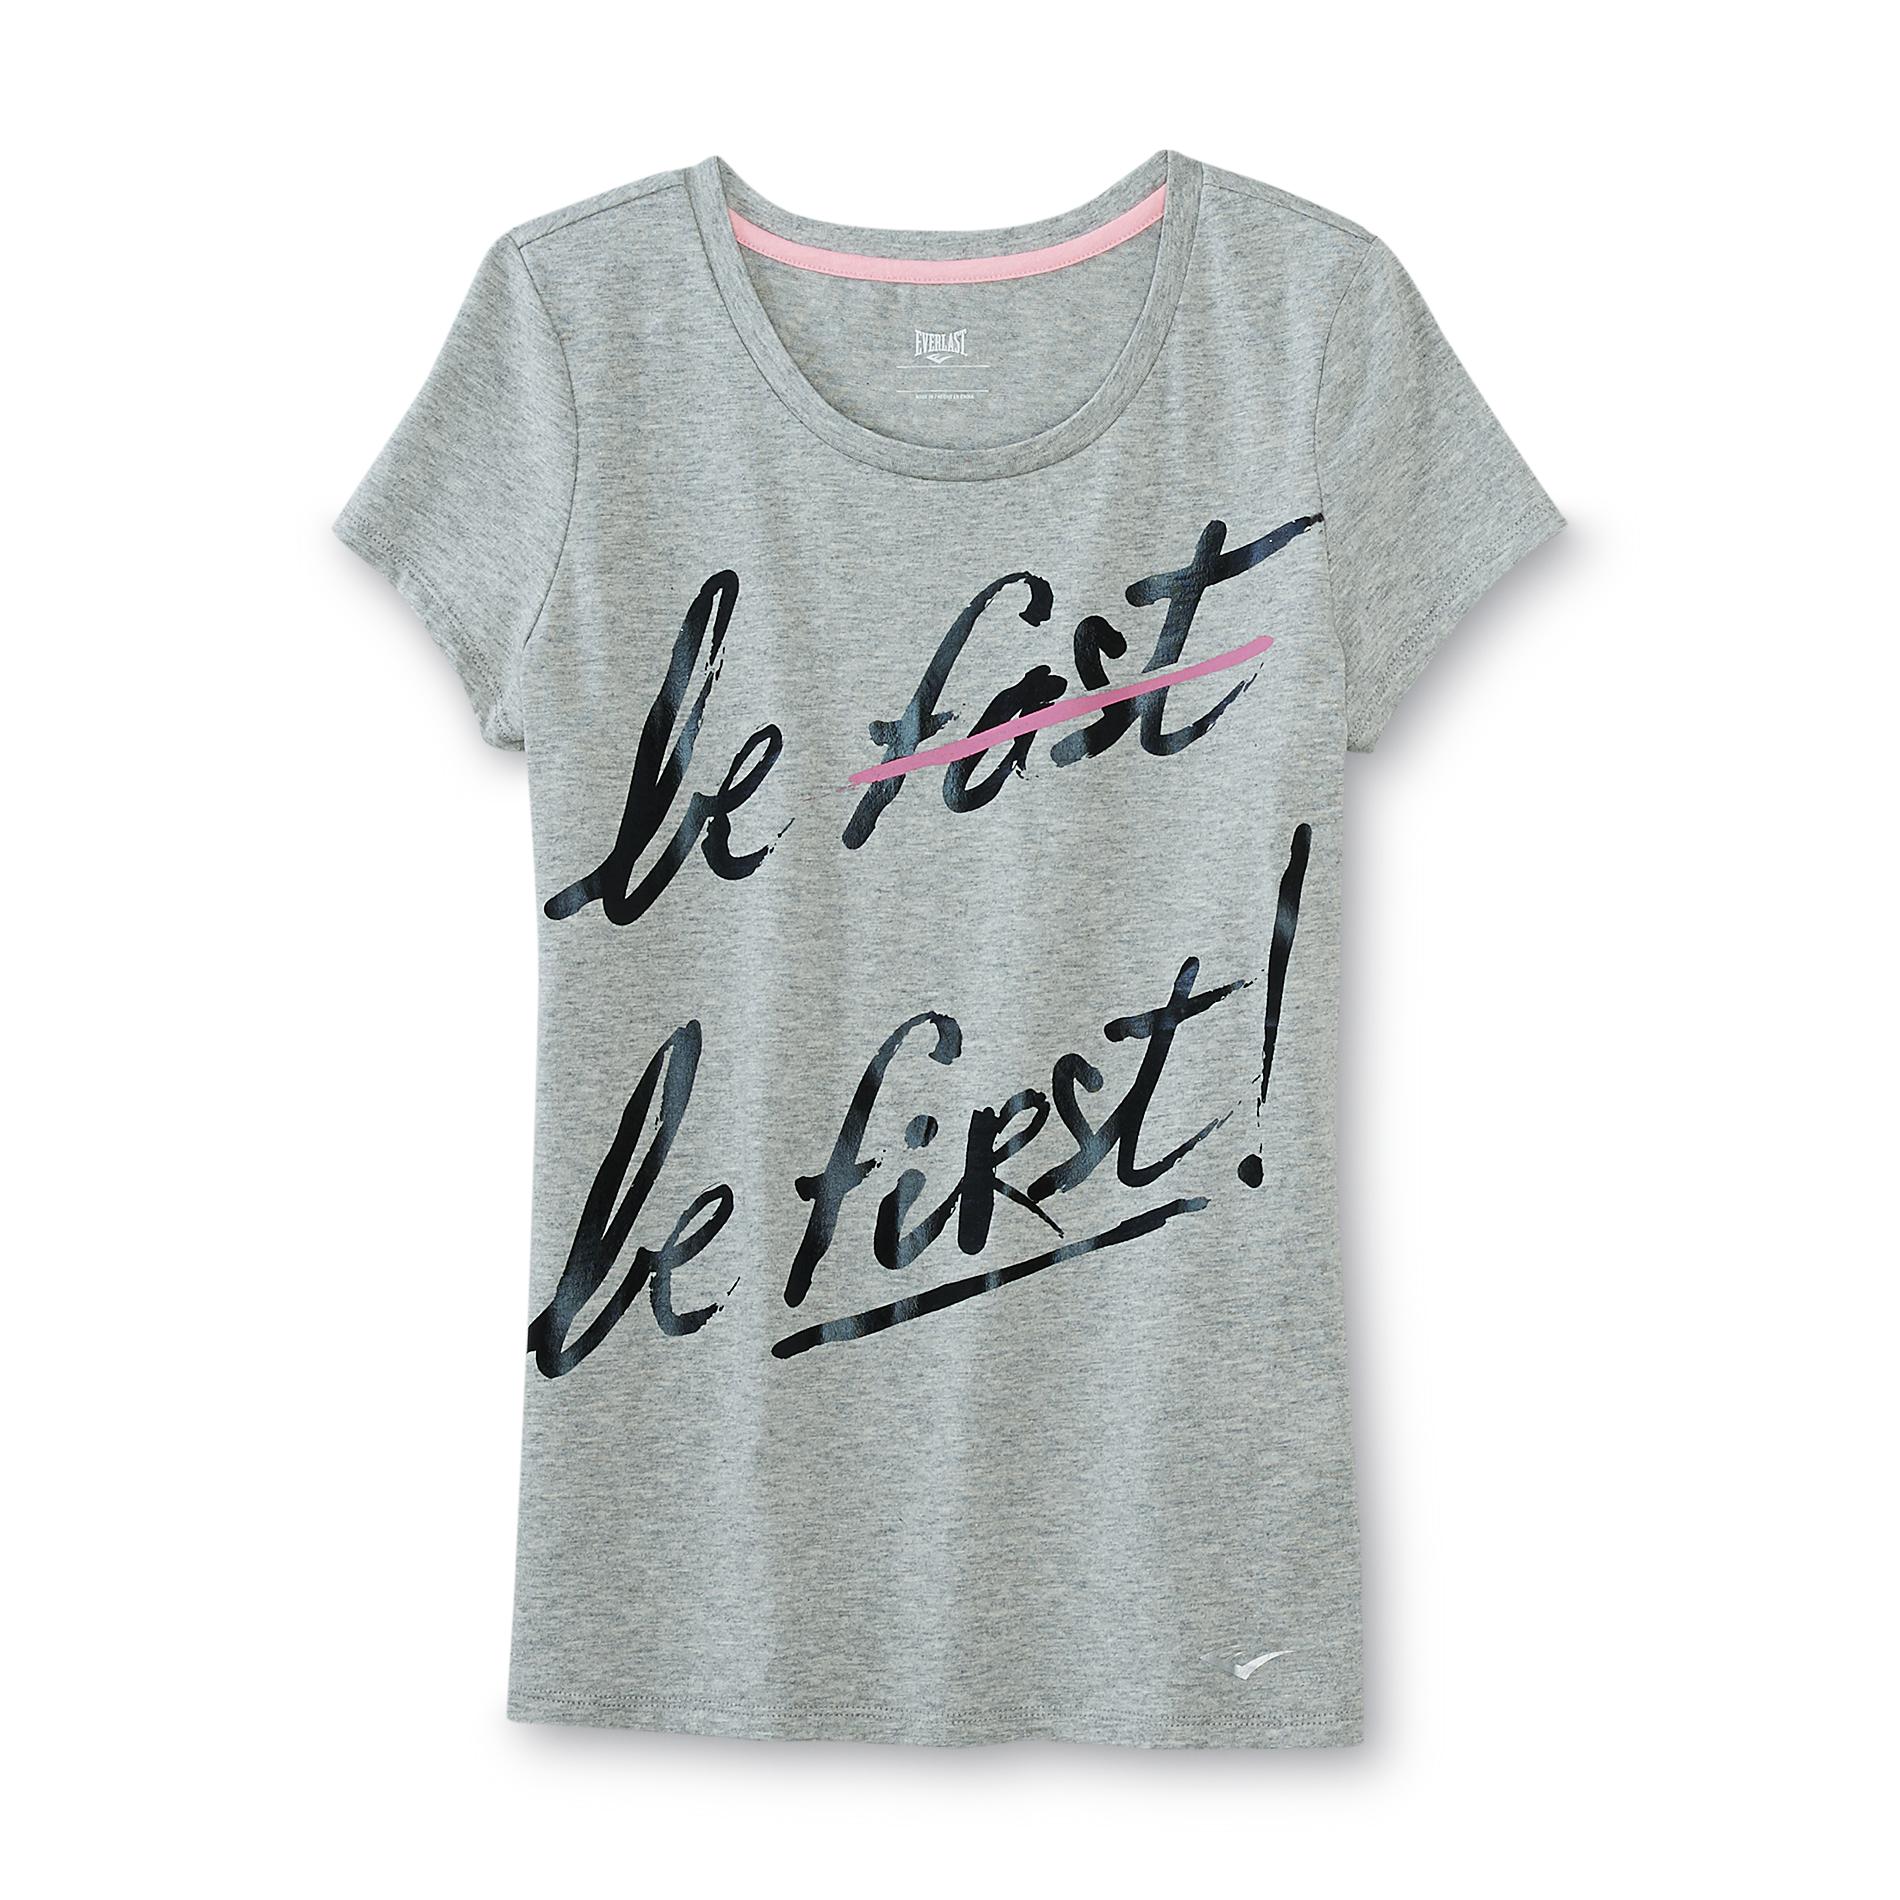 Everlast&reg; Girl's Athletic Top - Be Fast, Be First